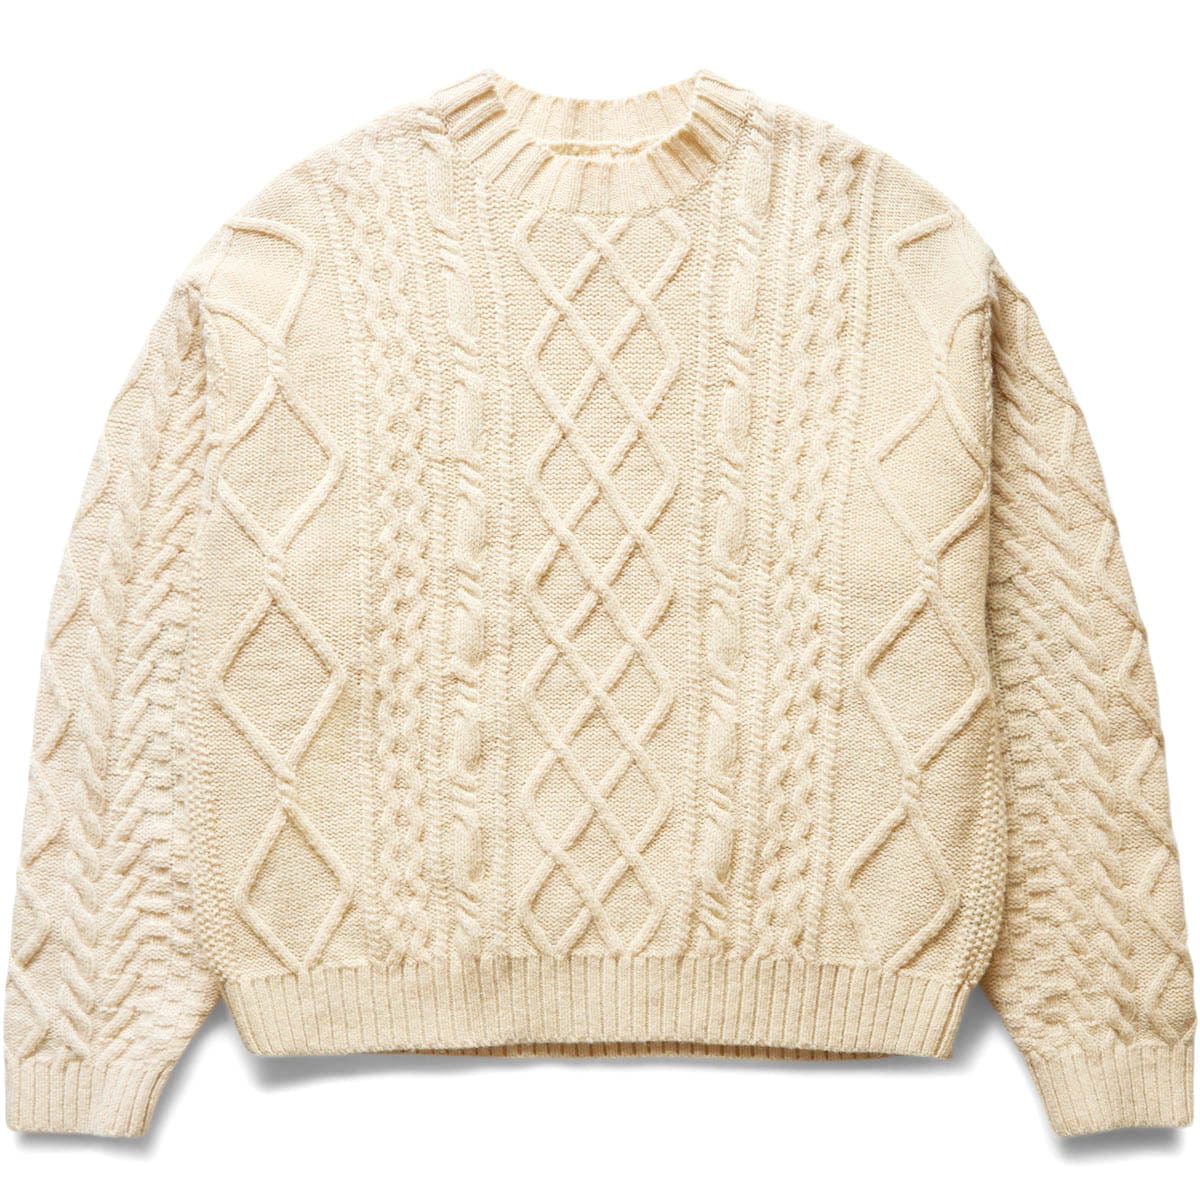 5G WOOL CABLE KNIT HAPPY PATCH CREW SWEATER